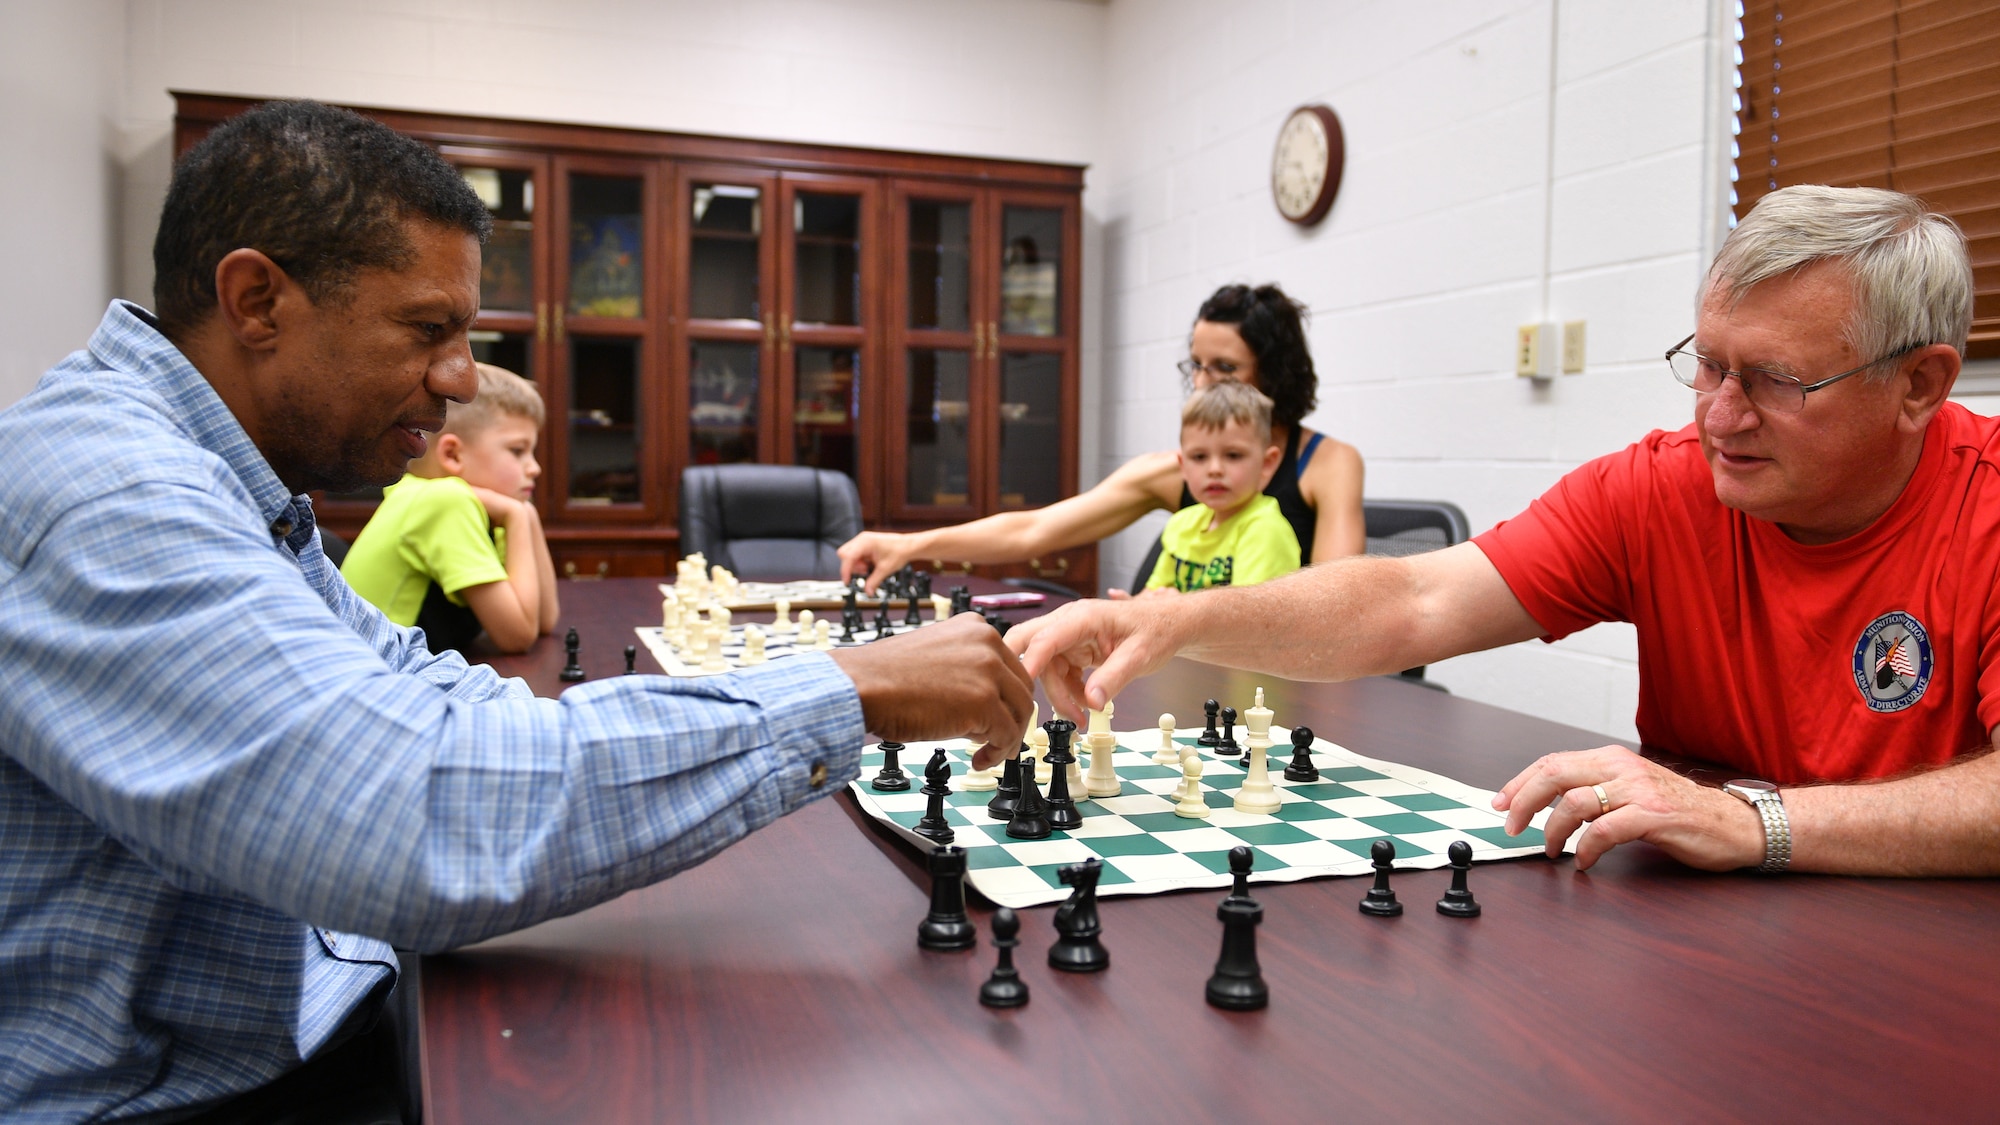 Roy Cole, left, and Neal Booher play a match during a 75th Support Squadron Chess Club meeting at Hill Air Force Base, Utah, July 26, 2018. The club is open to players of all ages and skill levels. (U.S. Air Force photo by R. Nial Bradshaw)